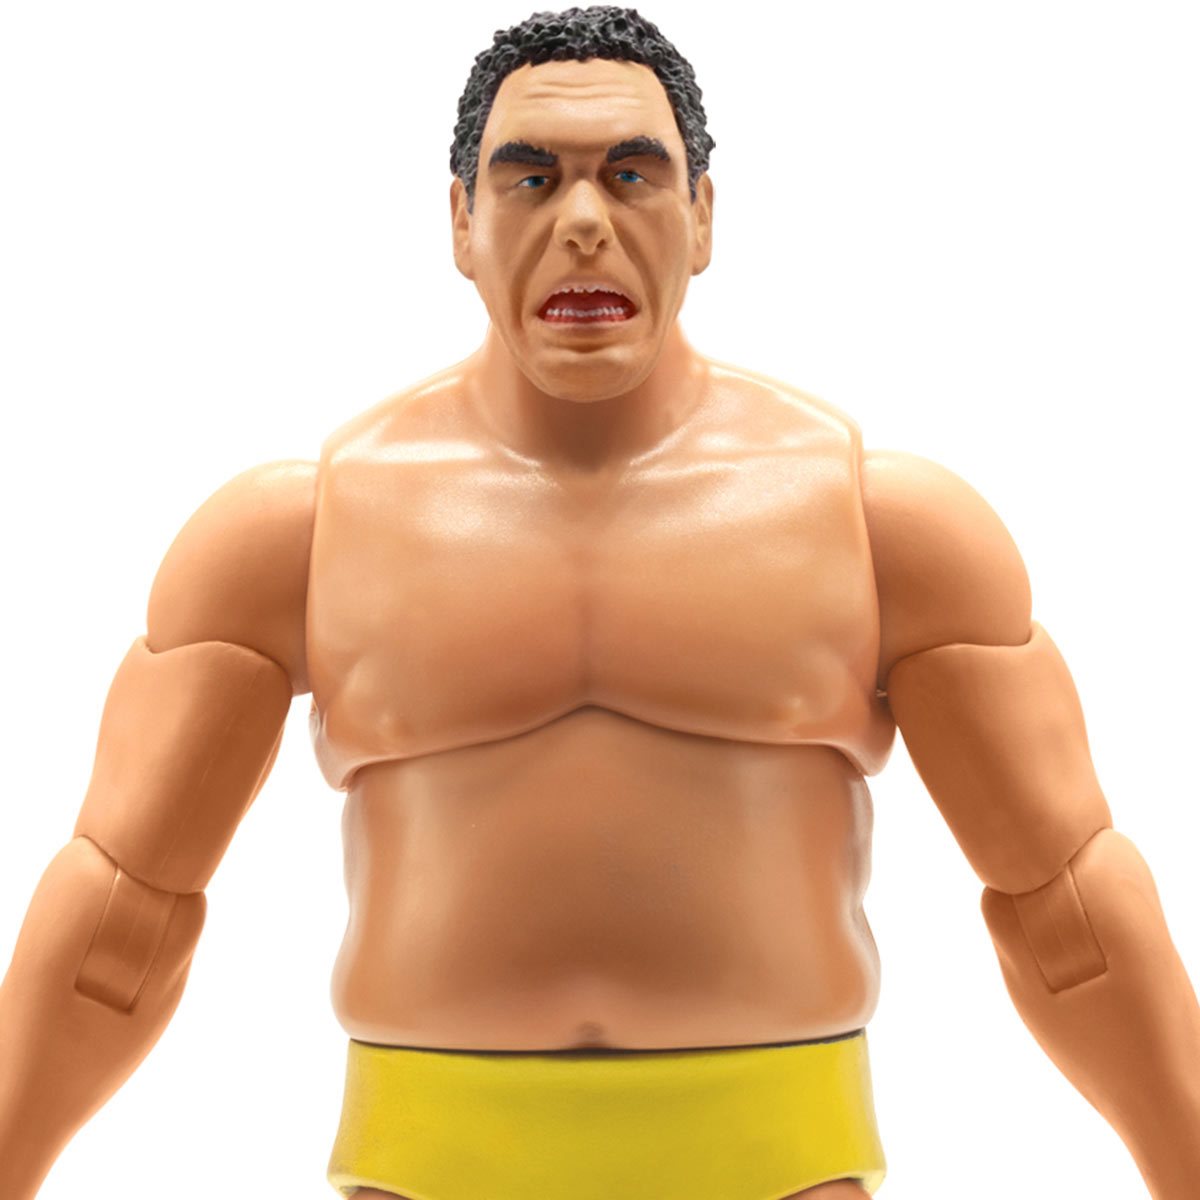 Mattel Andre The Giant 7 inch Action Figure for sale online 